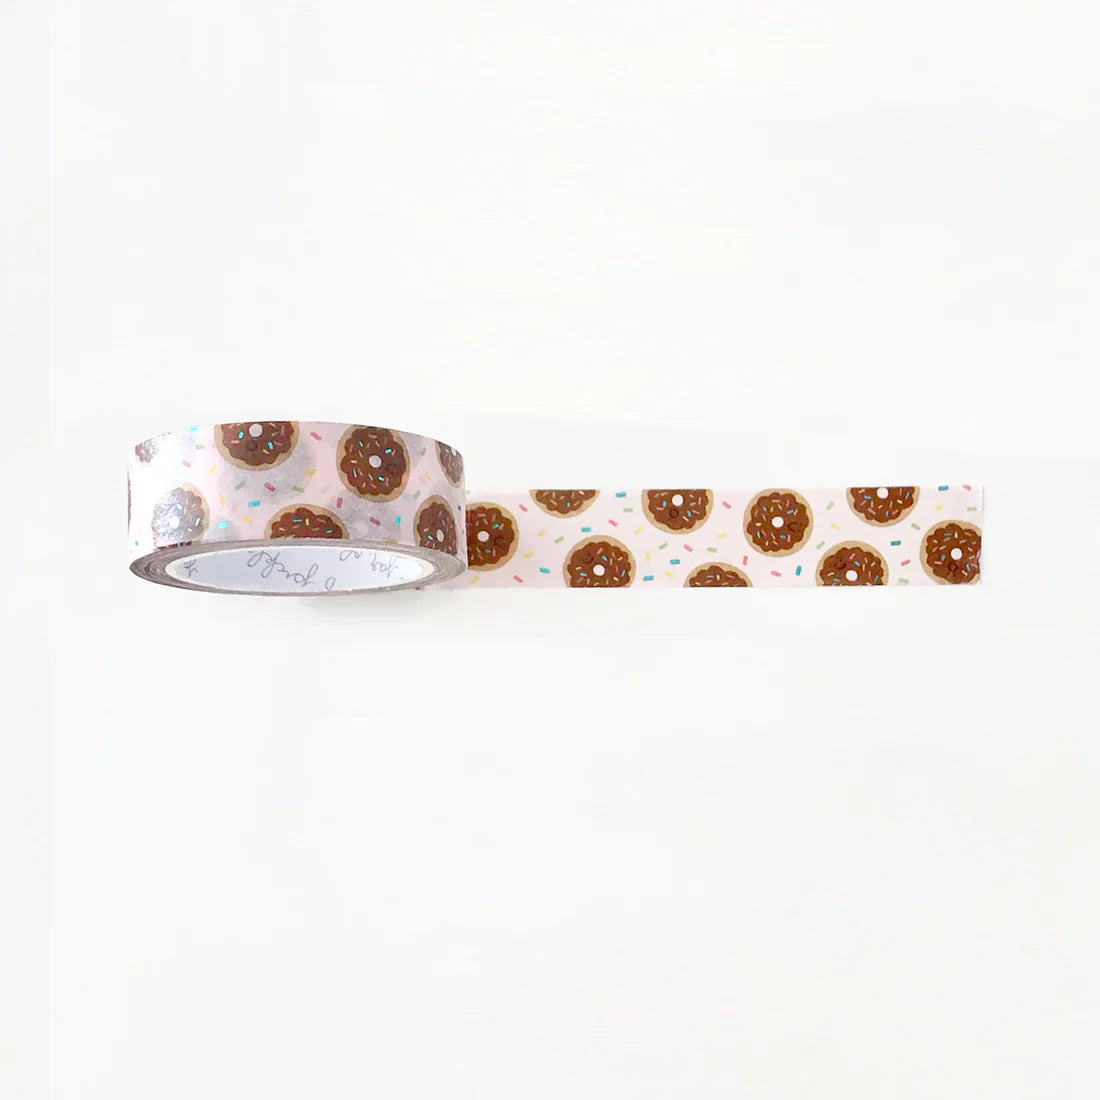 pink washi tape with chocolate sprinkle donuts on it